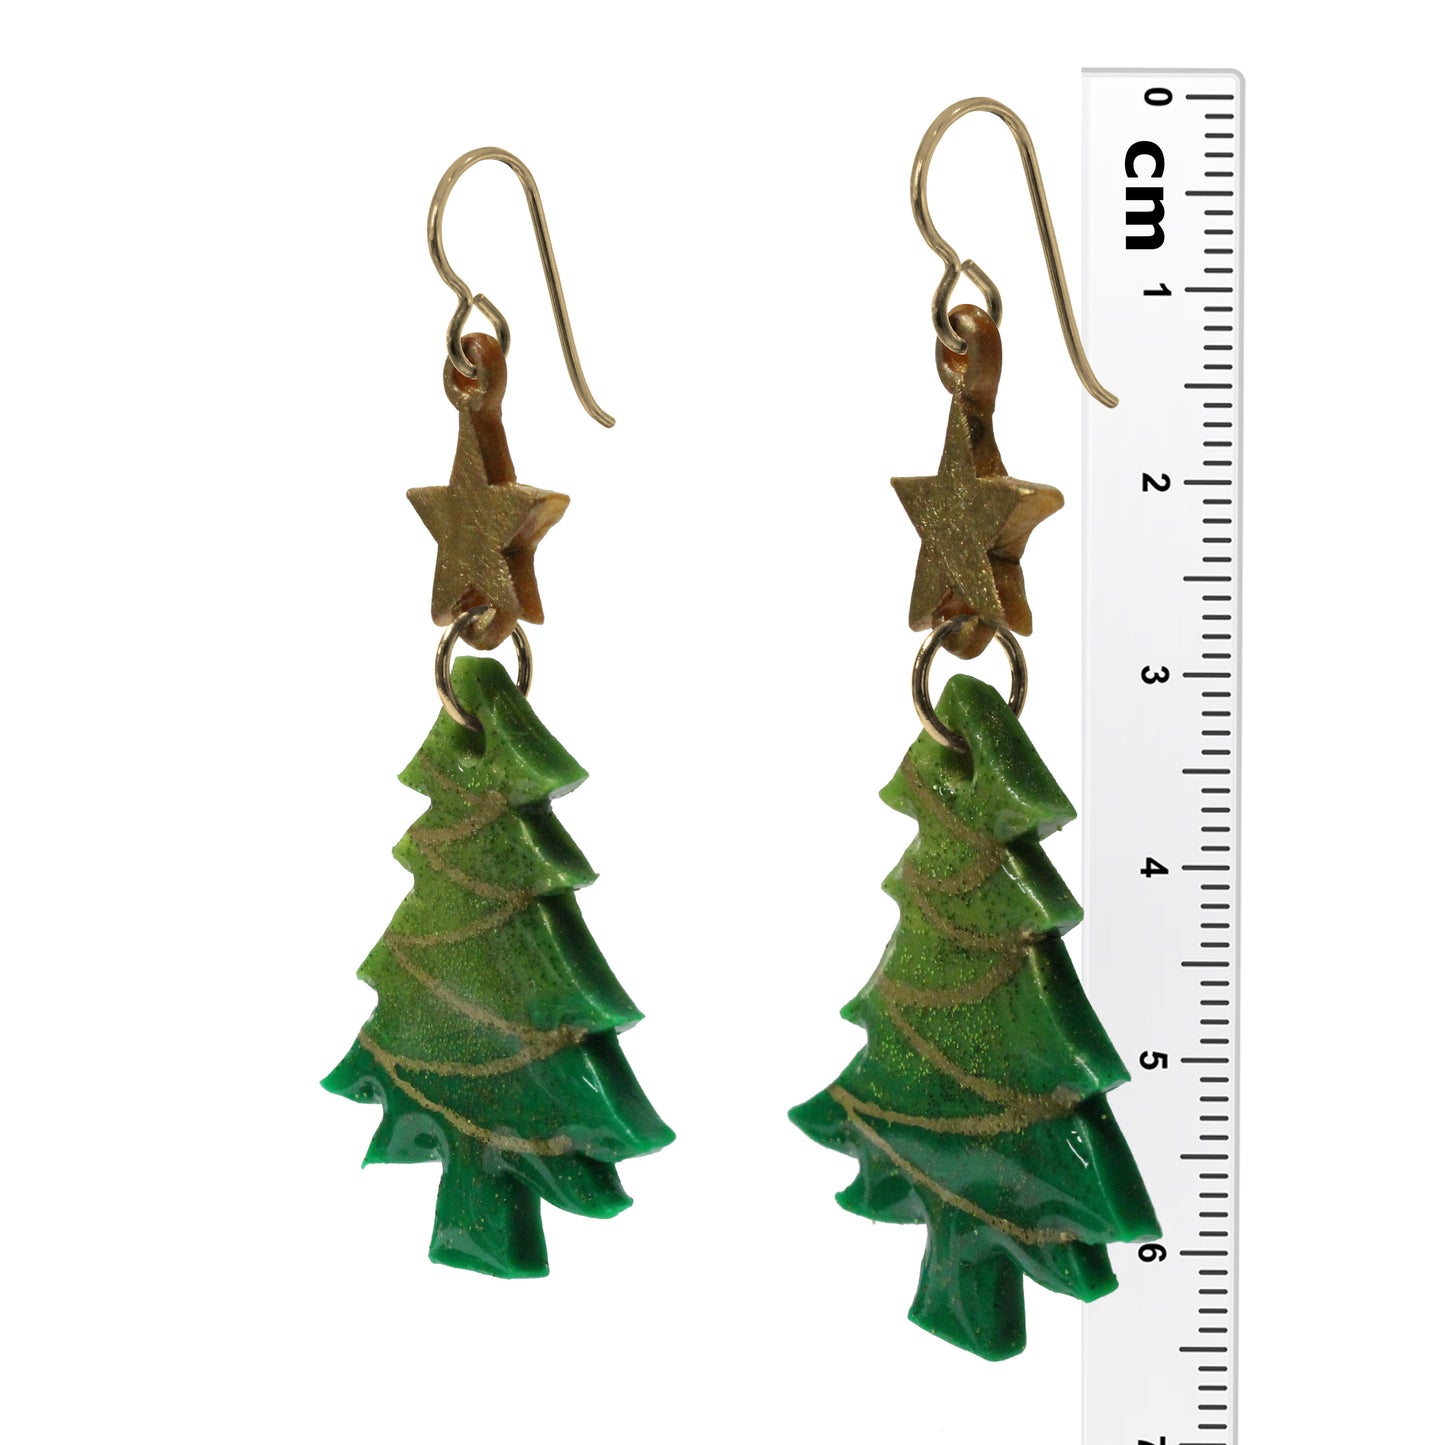 Christmas Tree Earrings / 65mm length / gold filled earwires